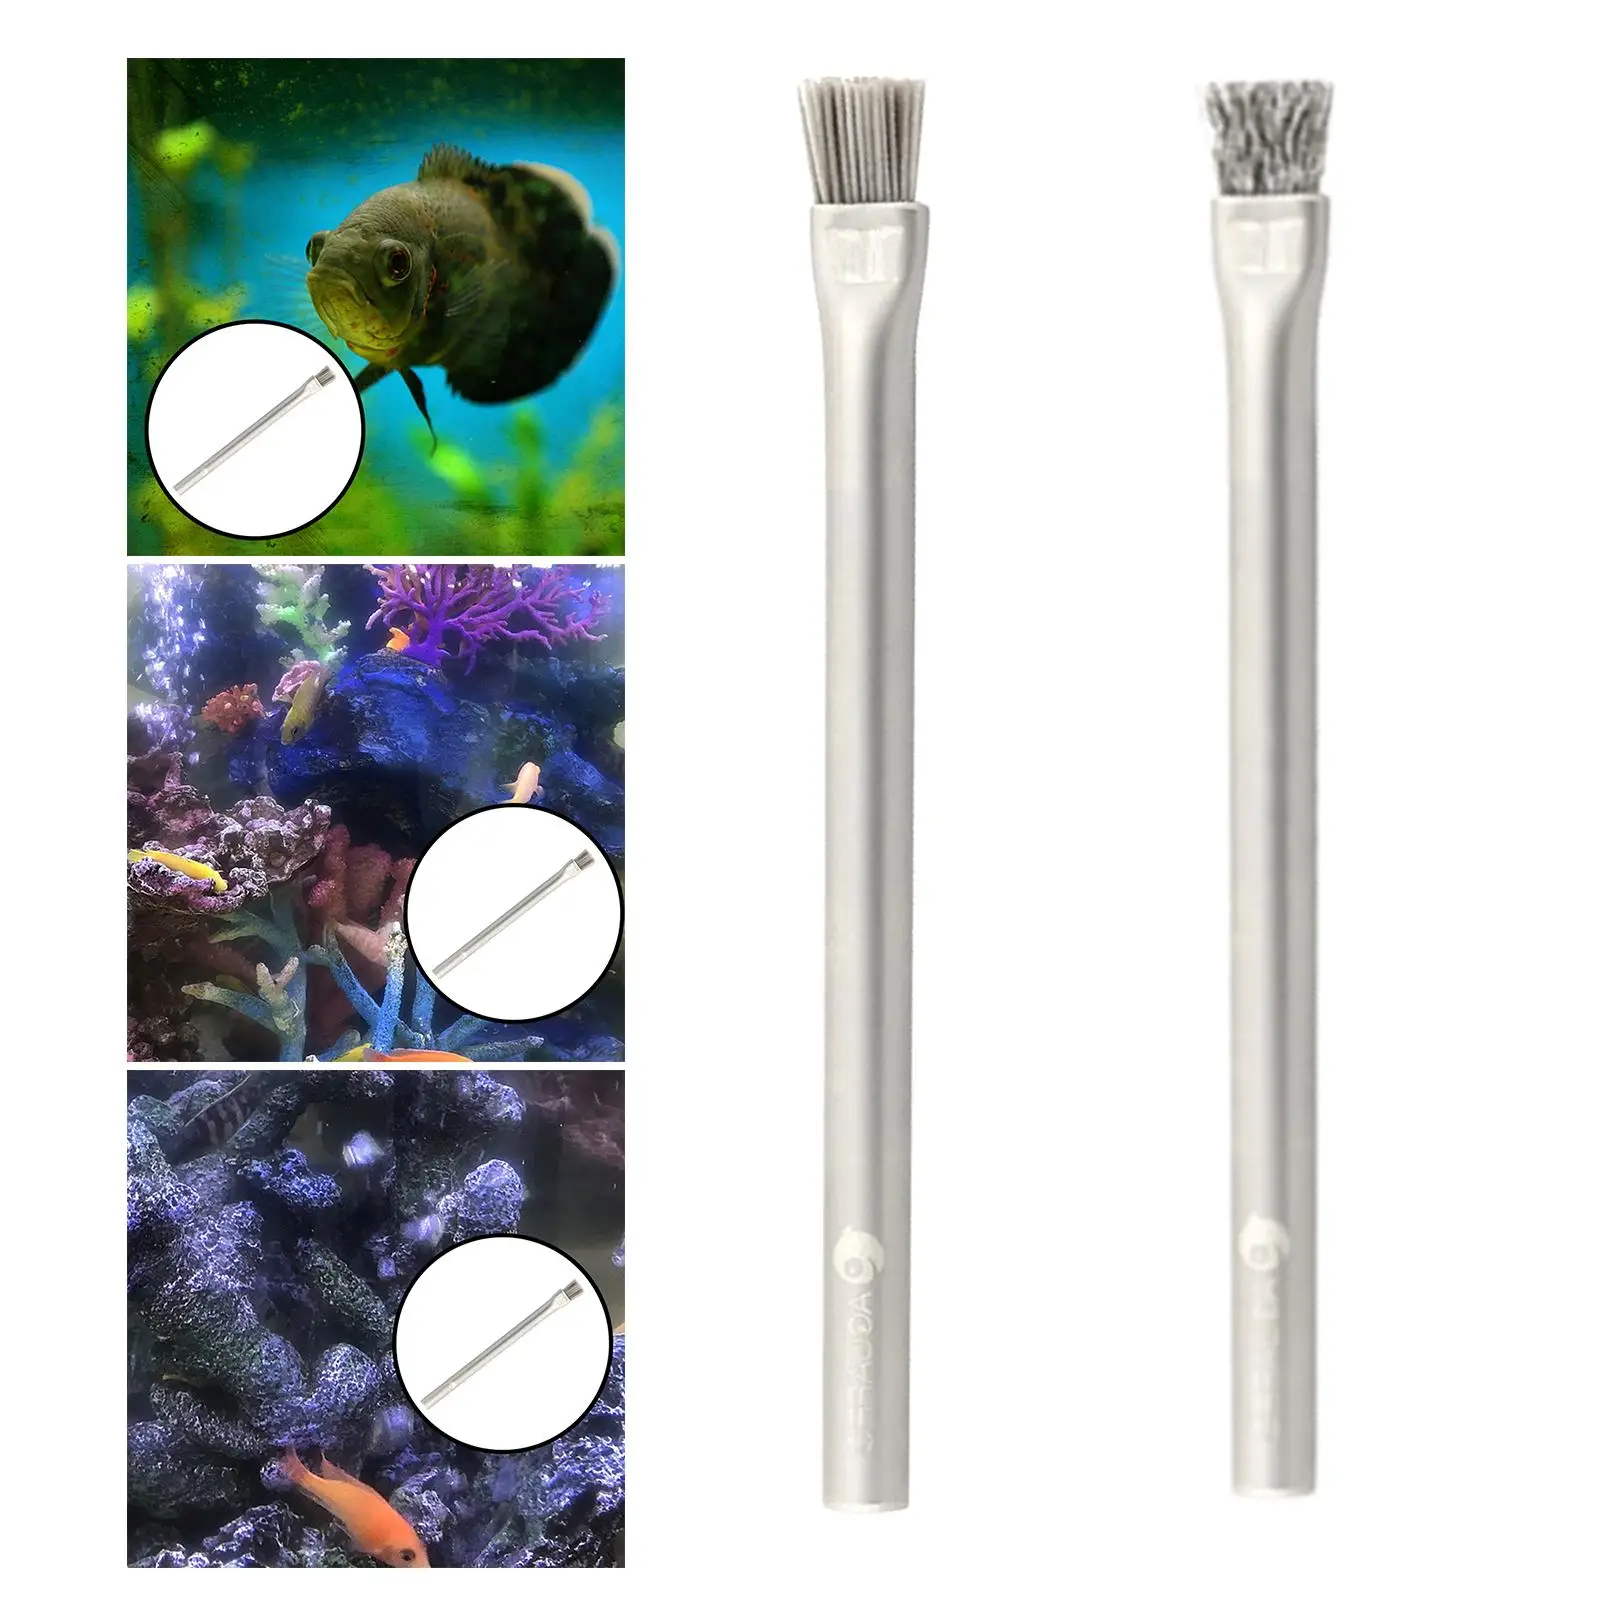 Fish Tanks Algae Cleaning Brush Aquarium Cleaning Tools Scrubber Remover Cleaner for Water Plants Pond Landscaping Stone Home